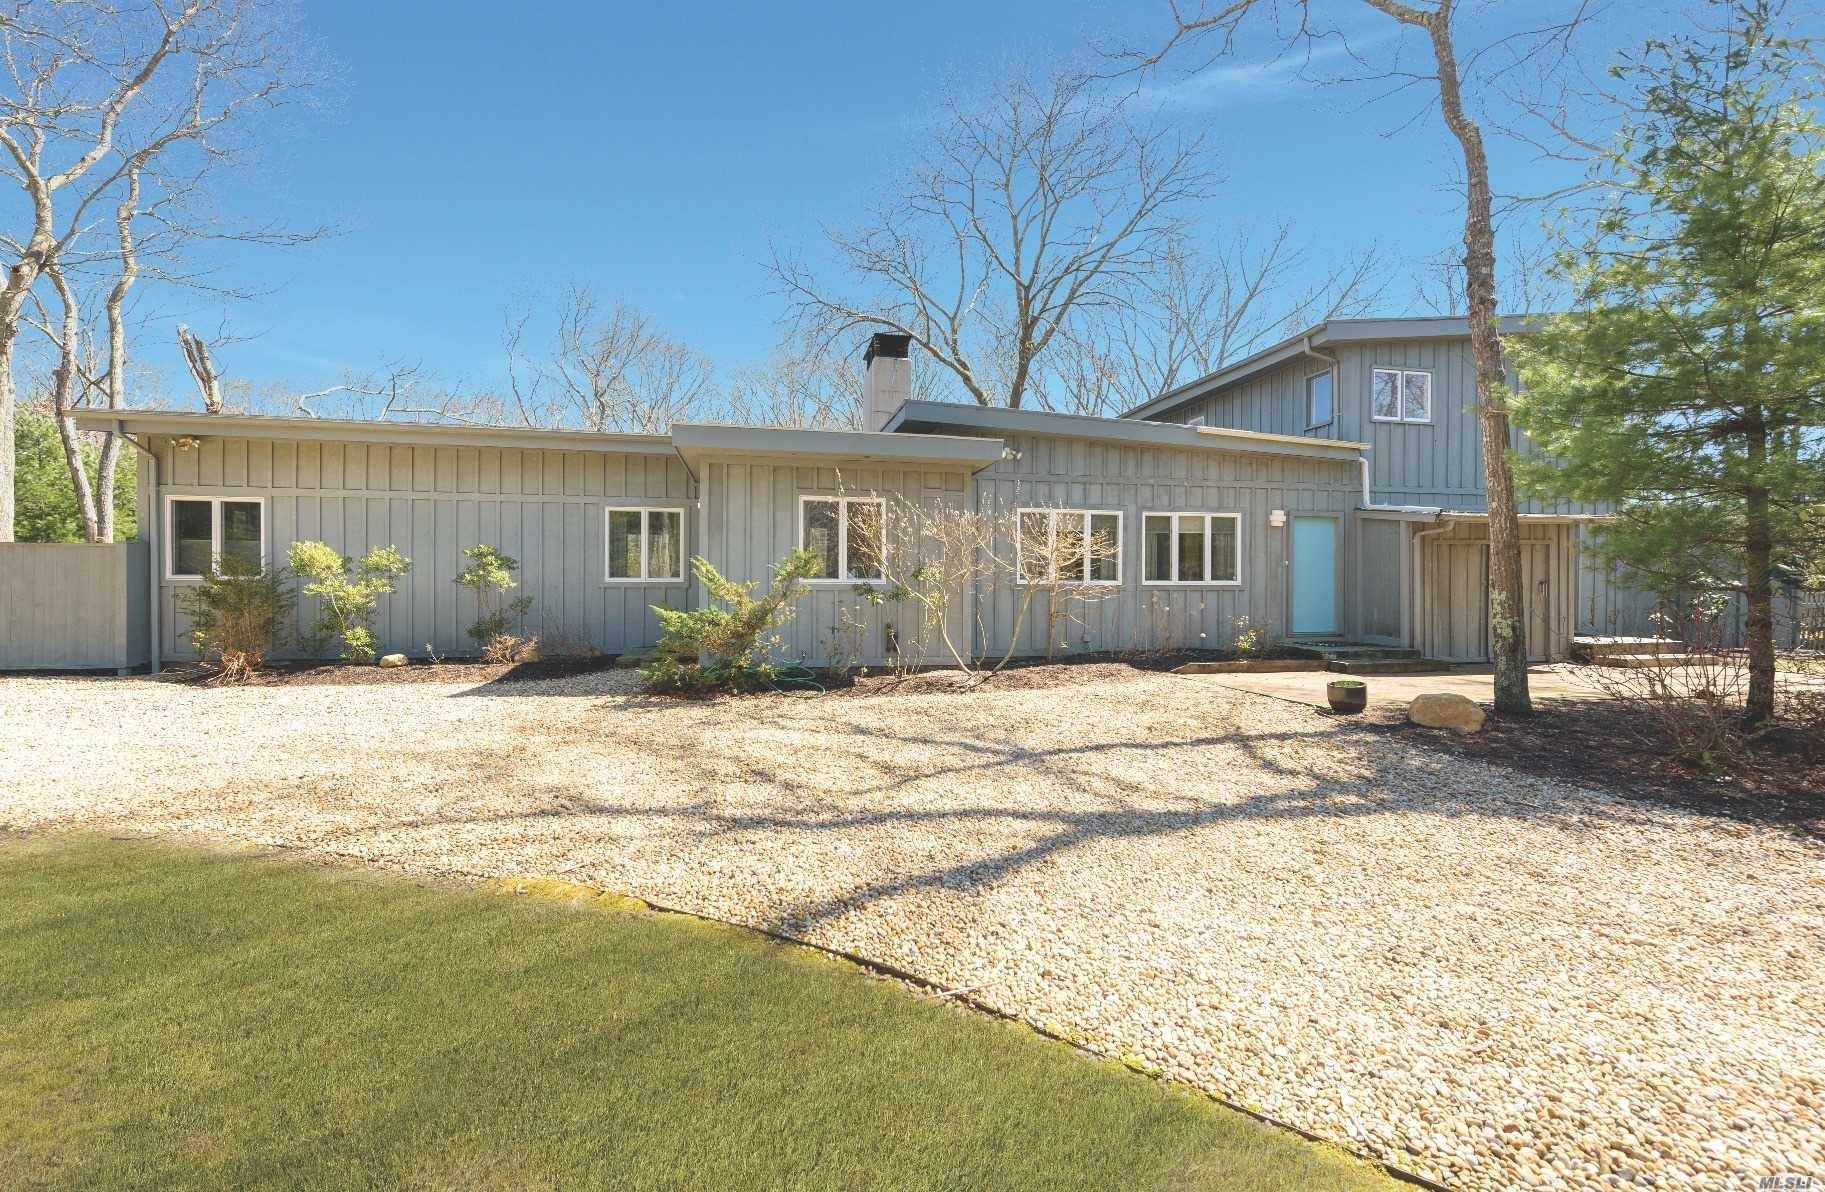 This artistic mid century modern four bedroom, three bath rarity offers a large master with a sitting room and sliders leading to the pool, a gourmet kitchen, high ceilings throughout, ...